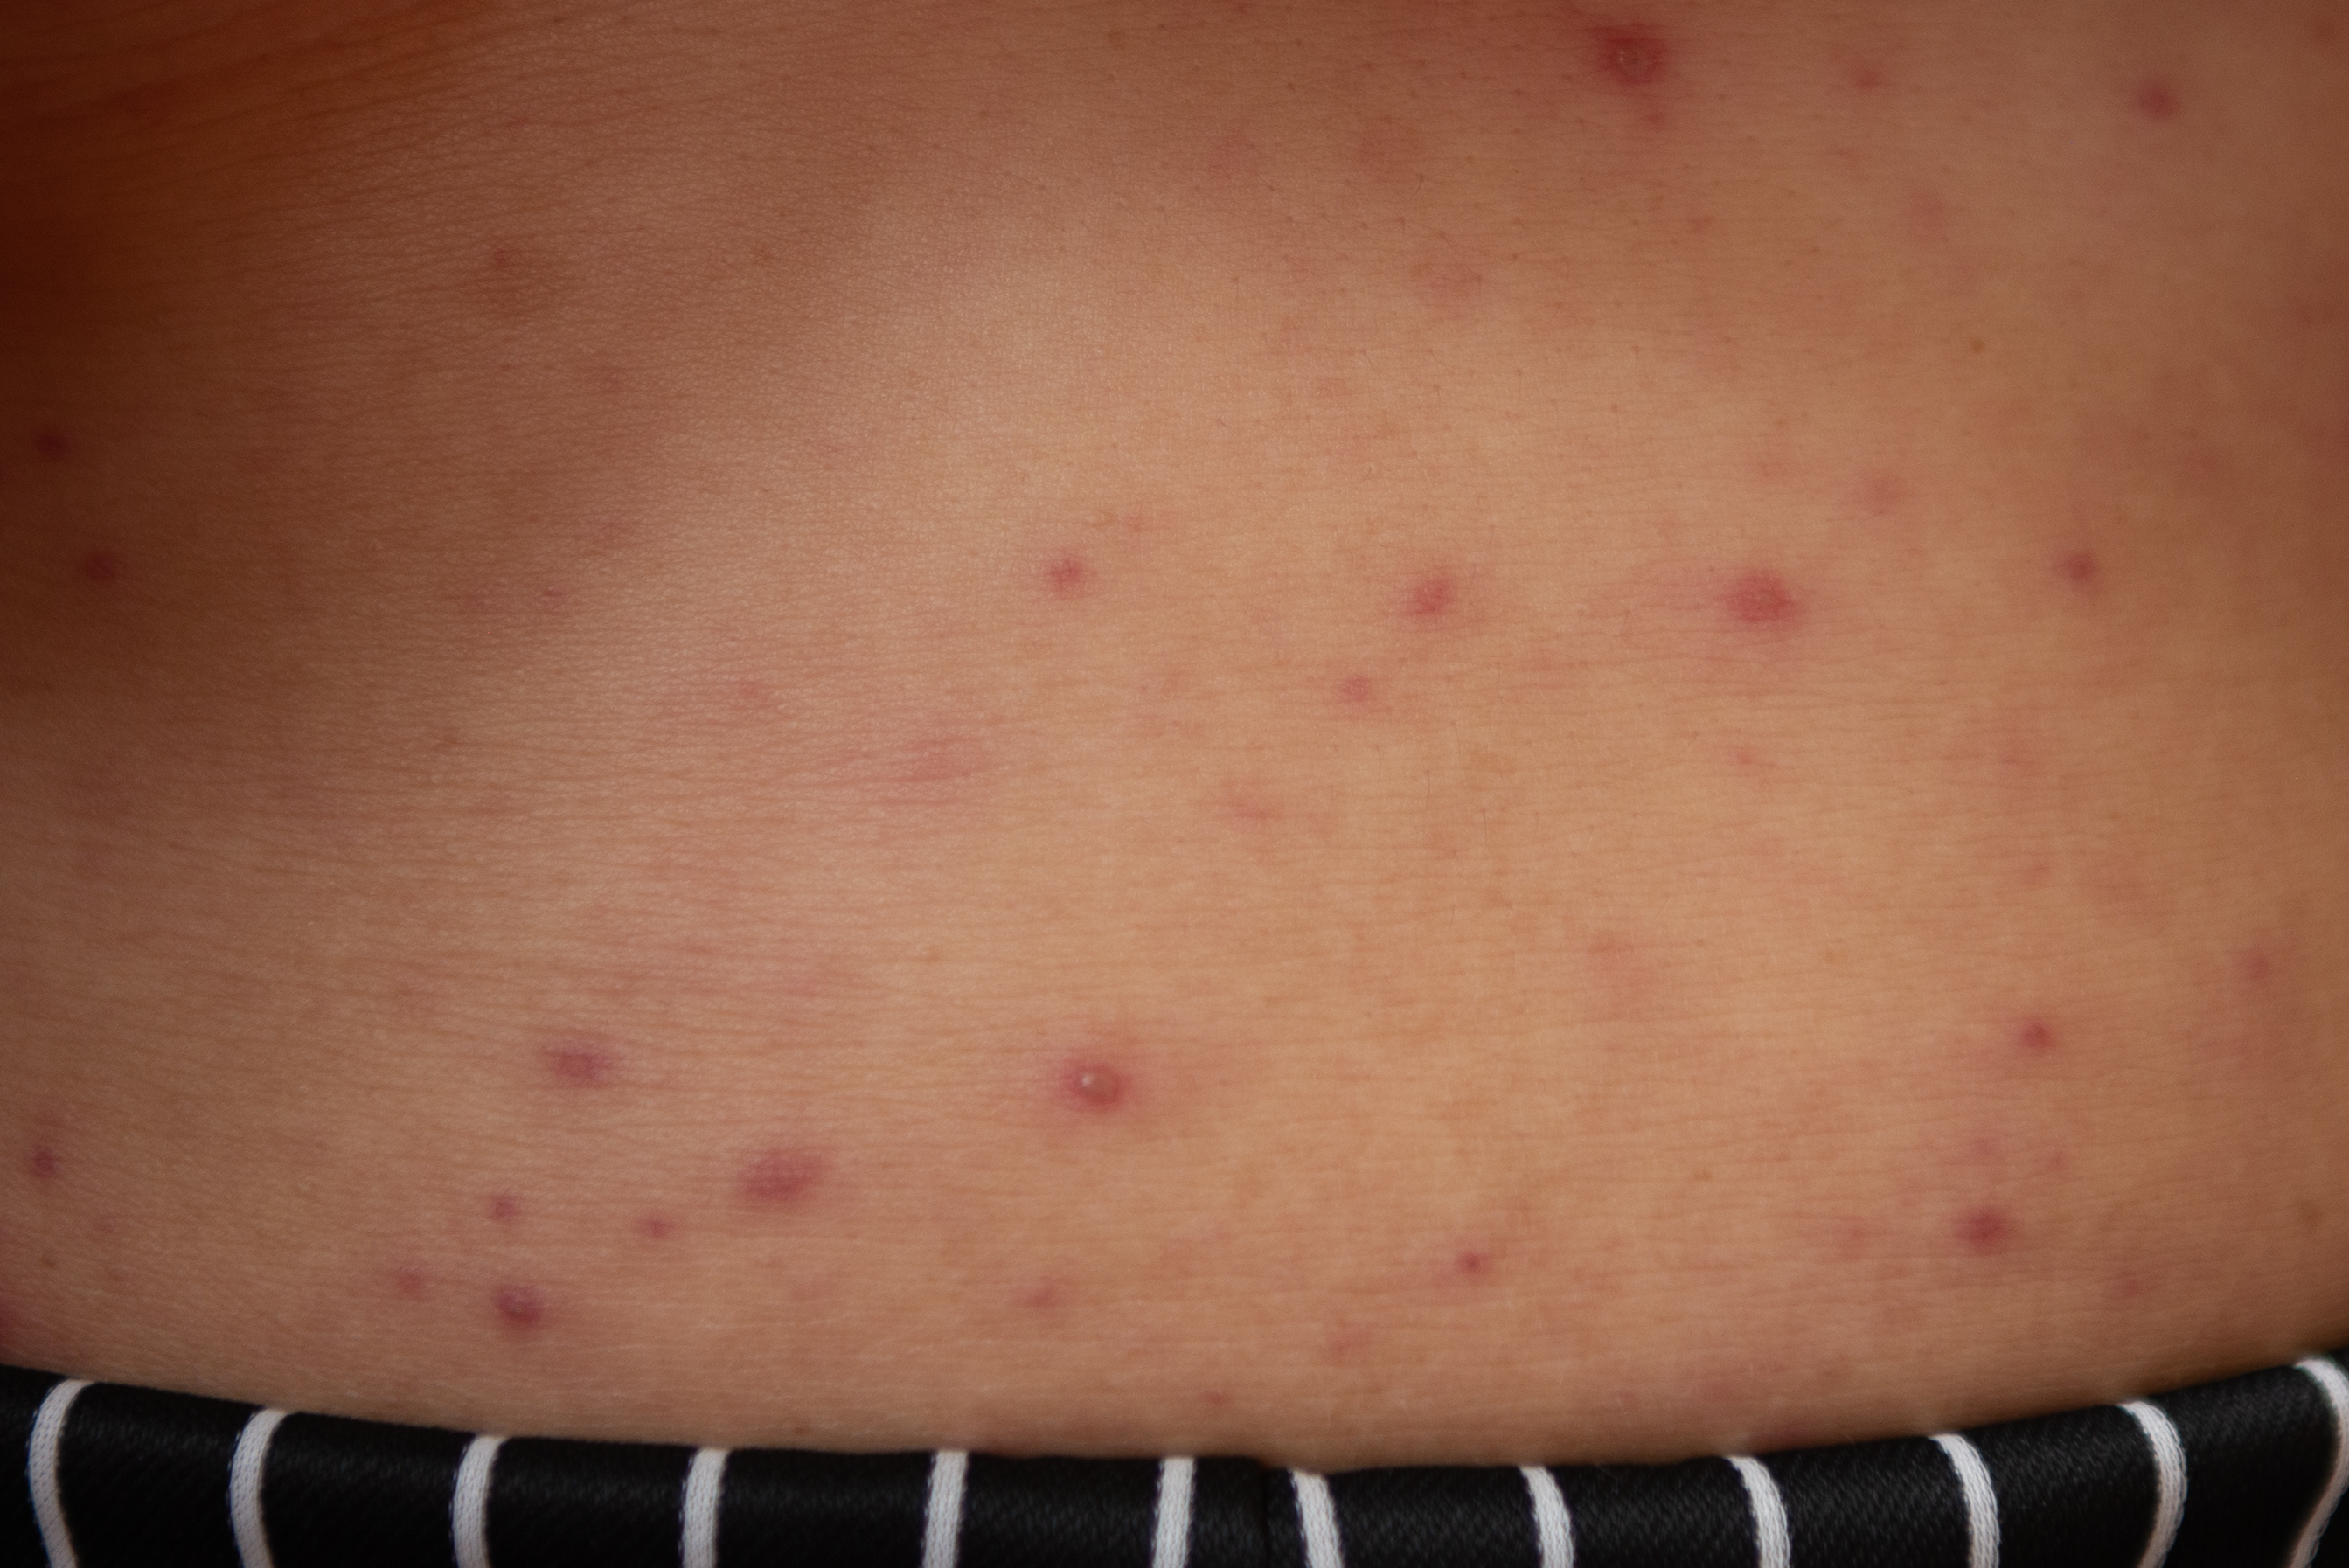 Pustules caused by viral infections or chickenpox disease 